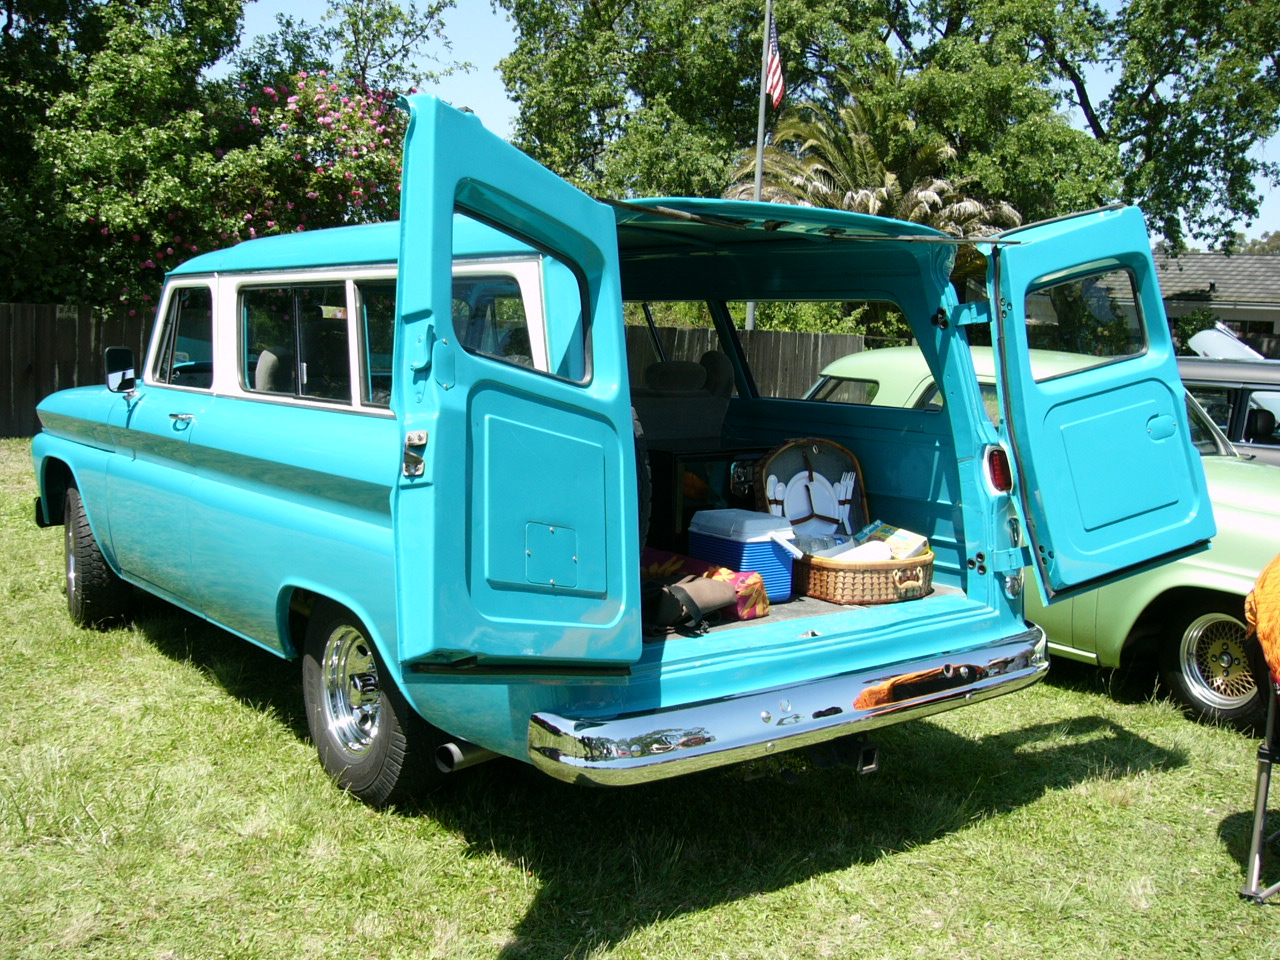 1965 Gmc carryall for sale #1